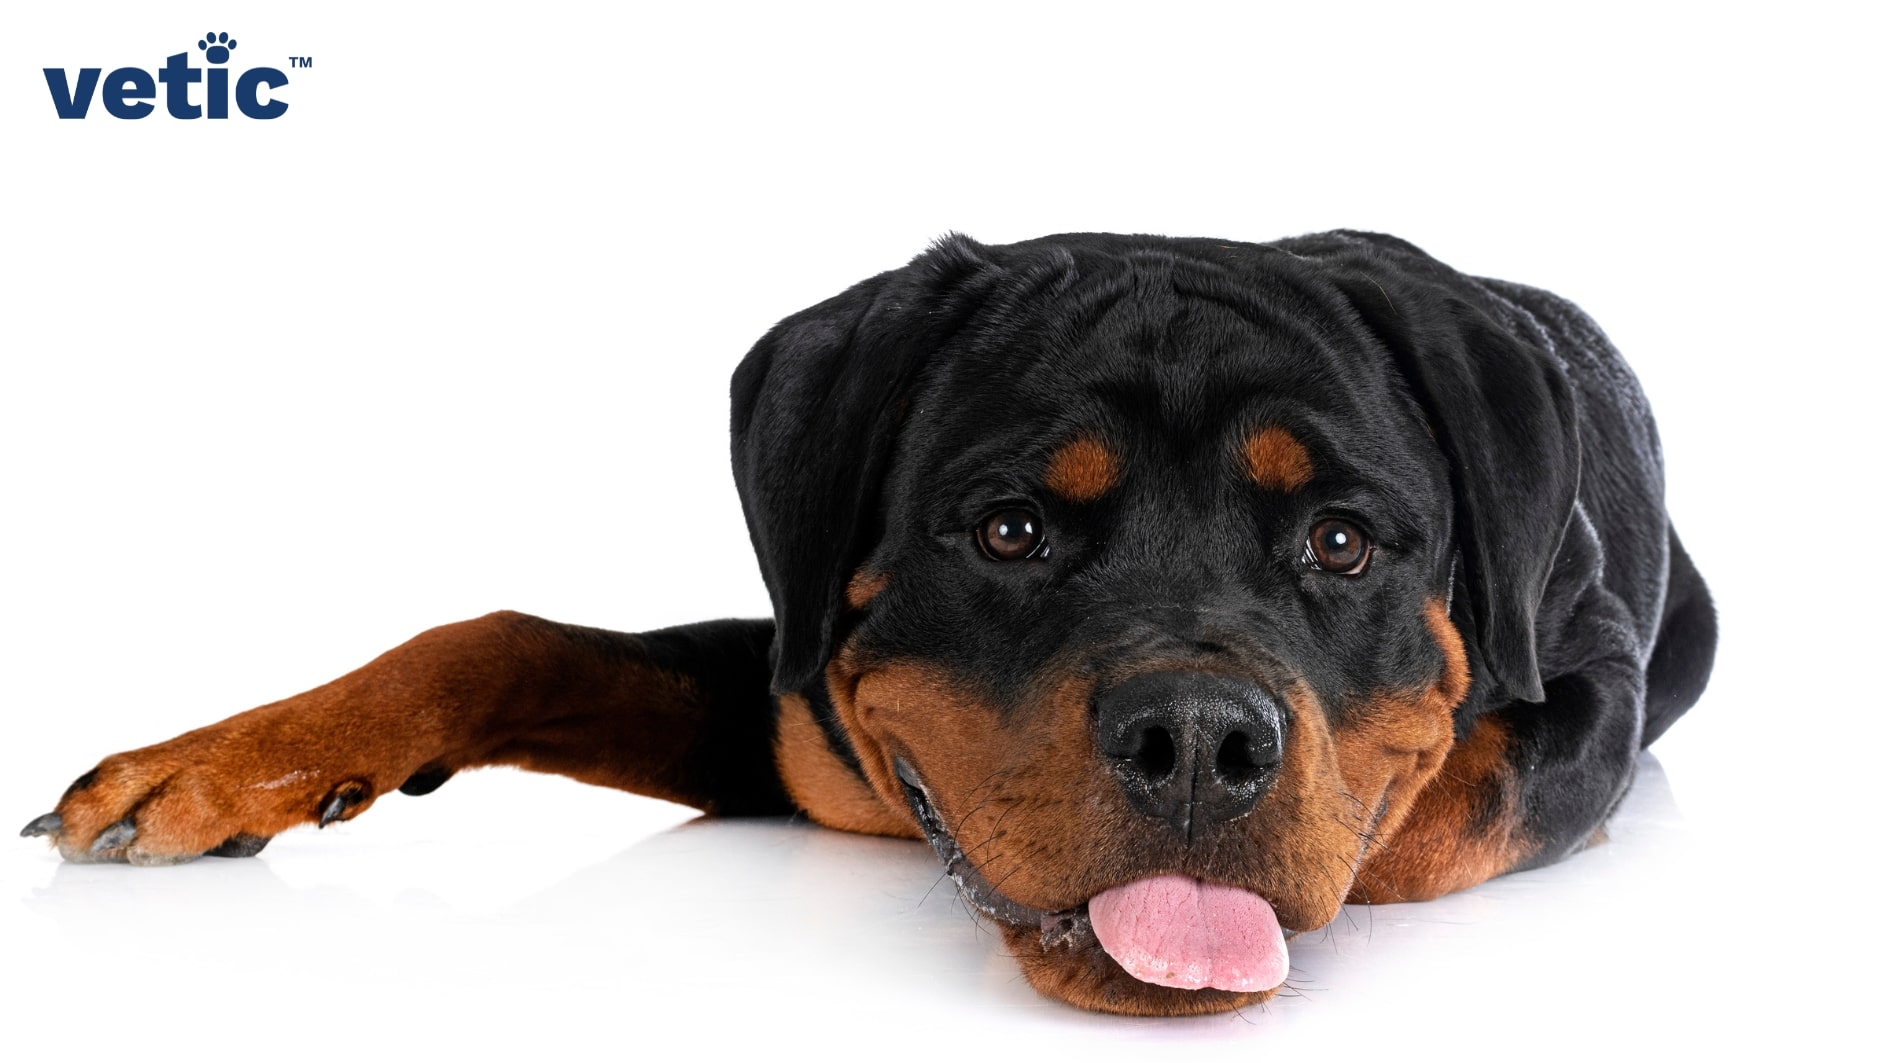 An adult Rottweiler facing the camera. Only the face and part of one hand is visible since he is lying in a twisted position. He has his tongue out. The Rottweiler breed may look menacing, but they have giant goofball energy.